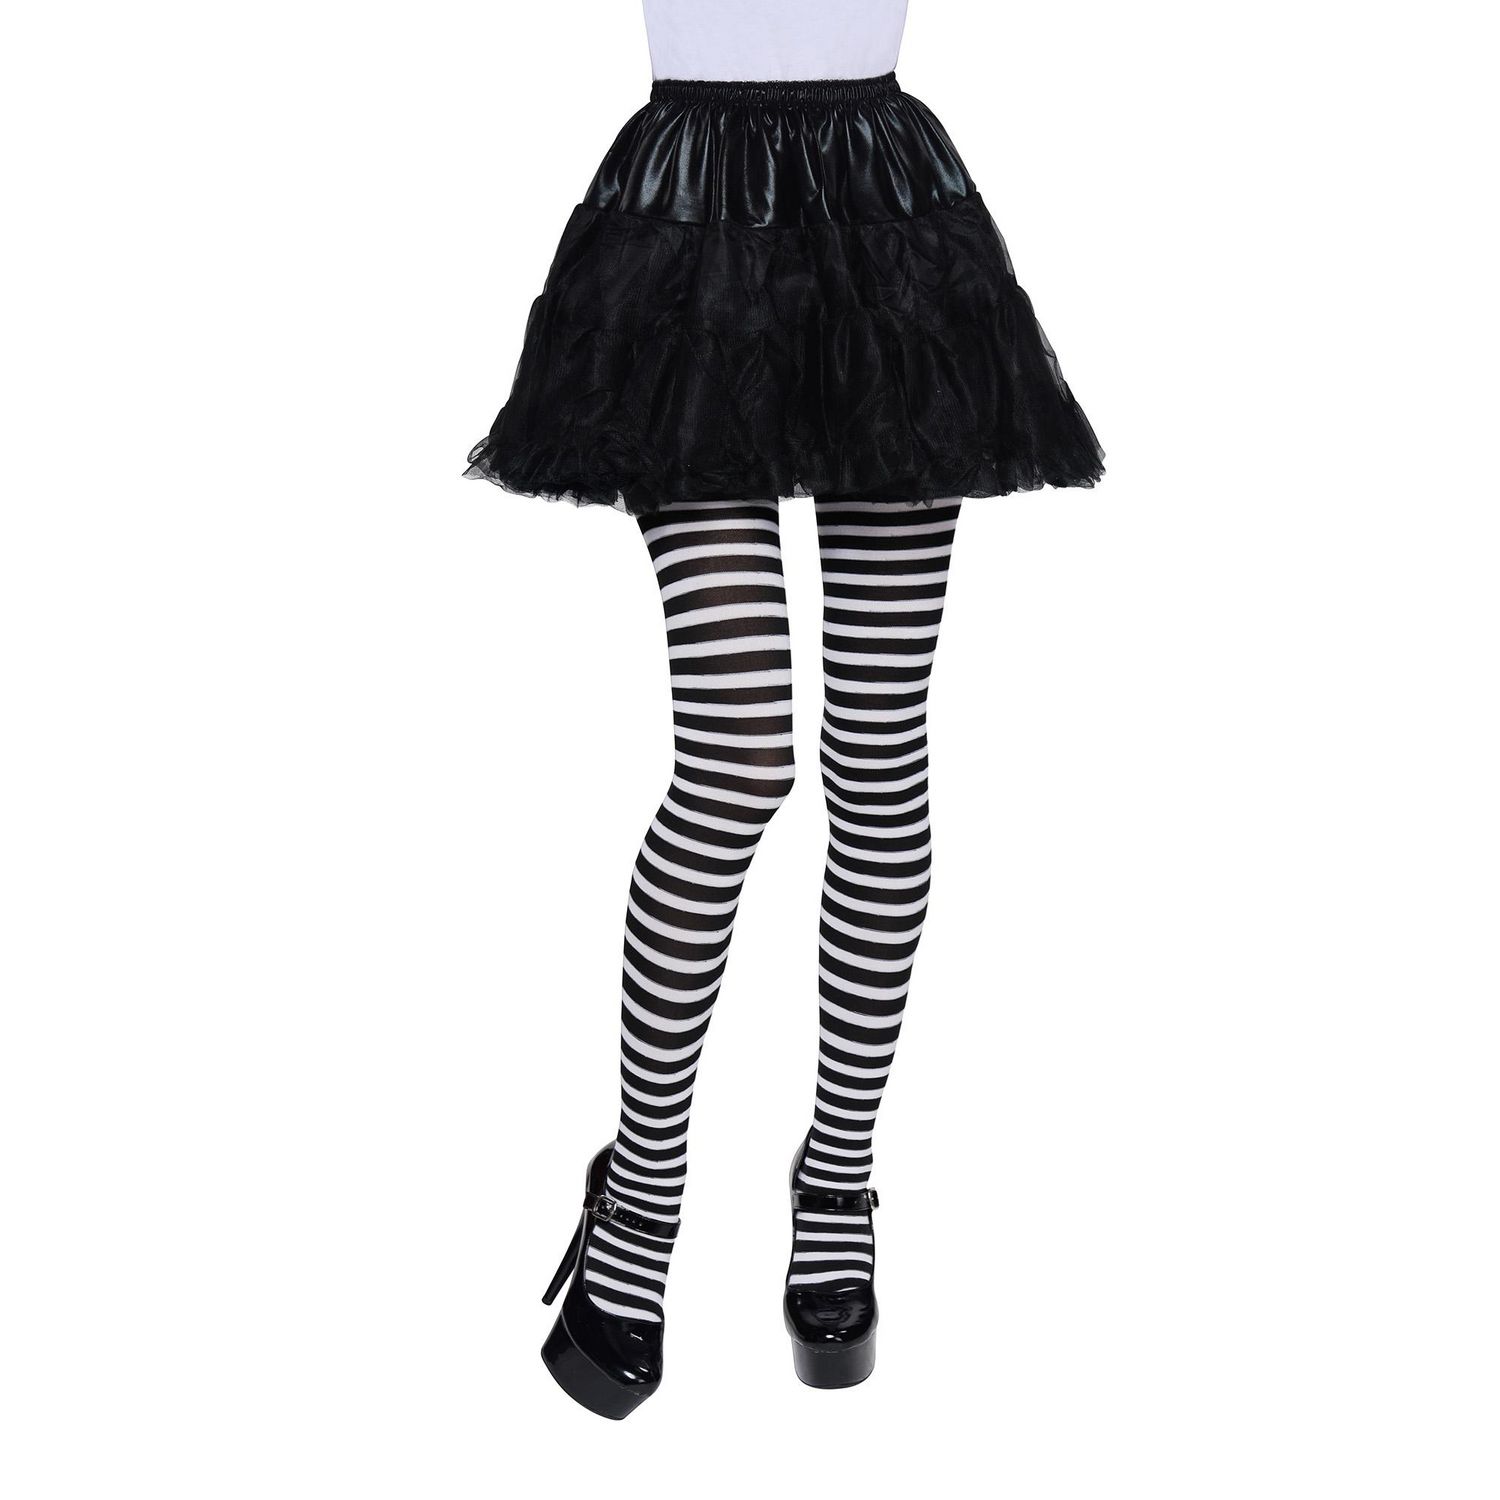  Black and White Stripe Stretchy Tights - Adult Standard Size, 1  Pair - Perfect for Halloween, Everyday Wear & Performances : Clothing,  Shoes & Jewelry